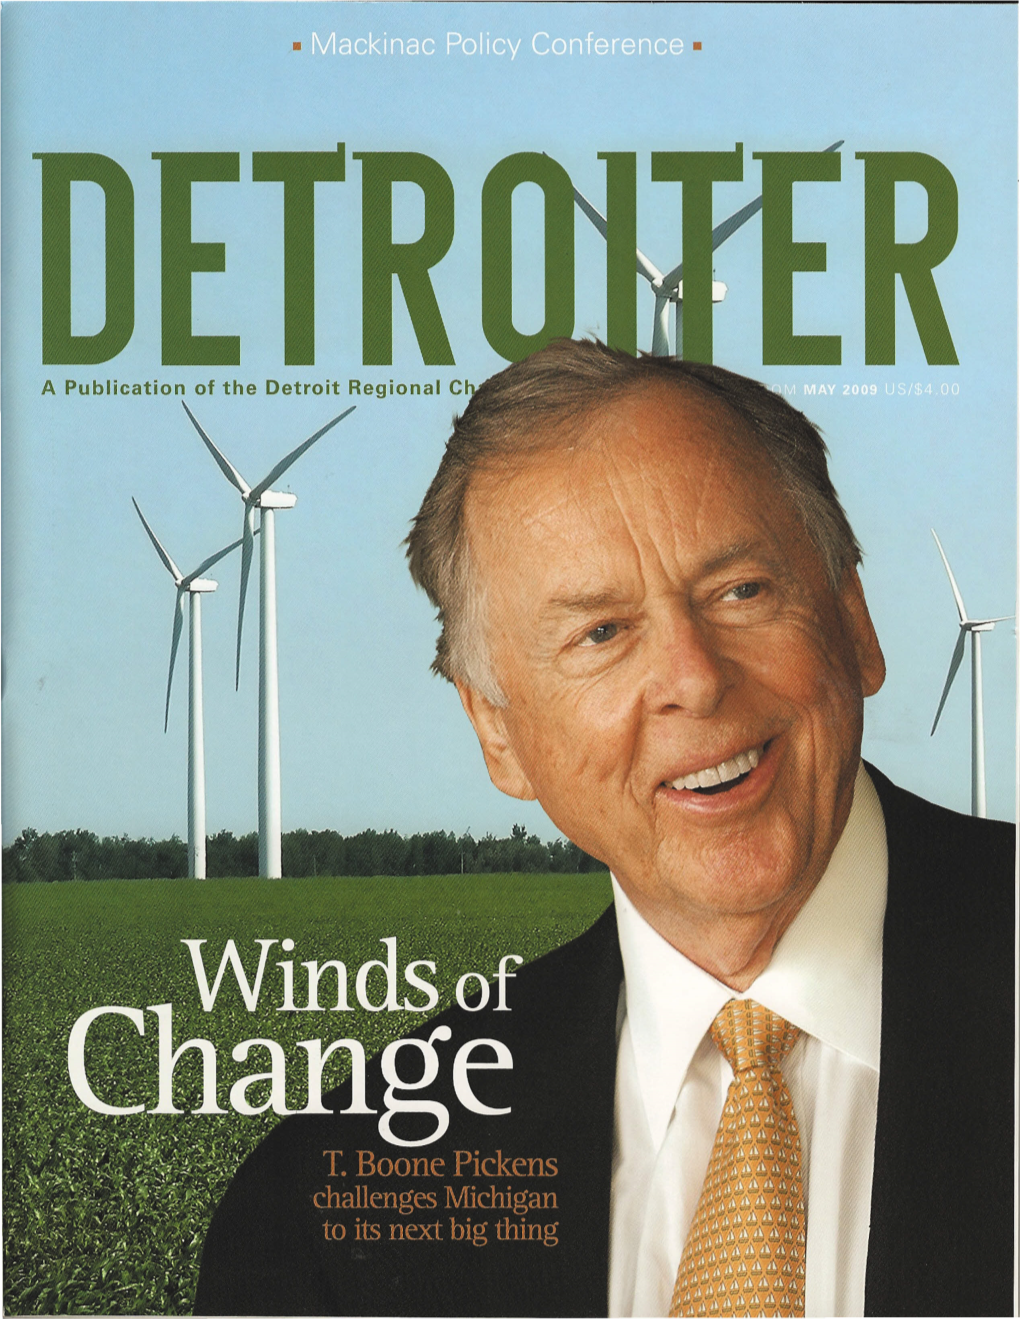 A Publication of the Detroit Regional C Wind Turbine Manufac Uring and Alternative Energy Development Are Detroit's Next Big Thing by Chris Mead